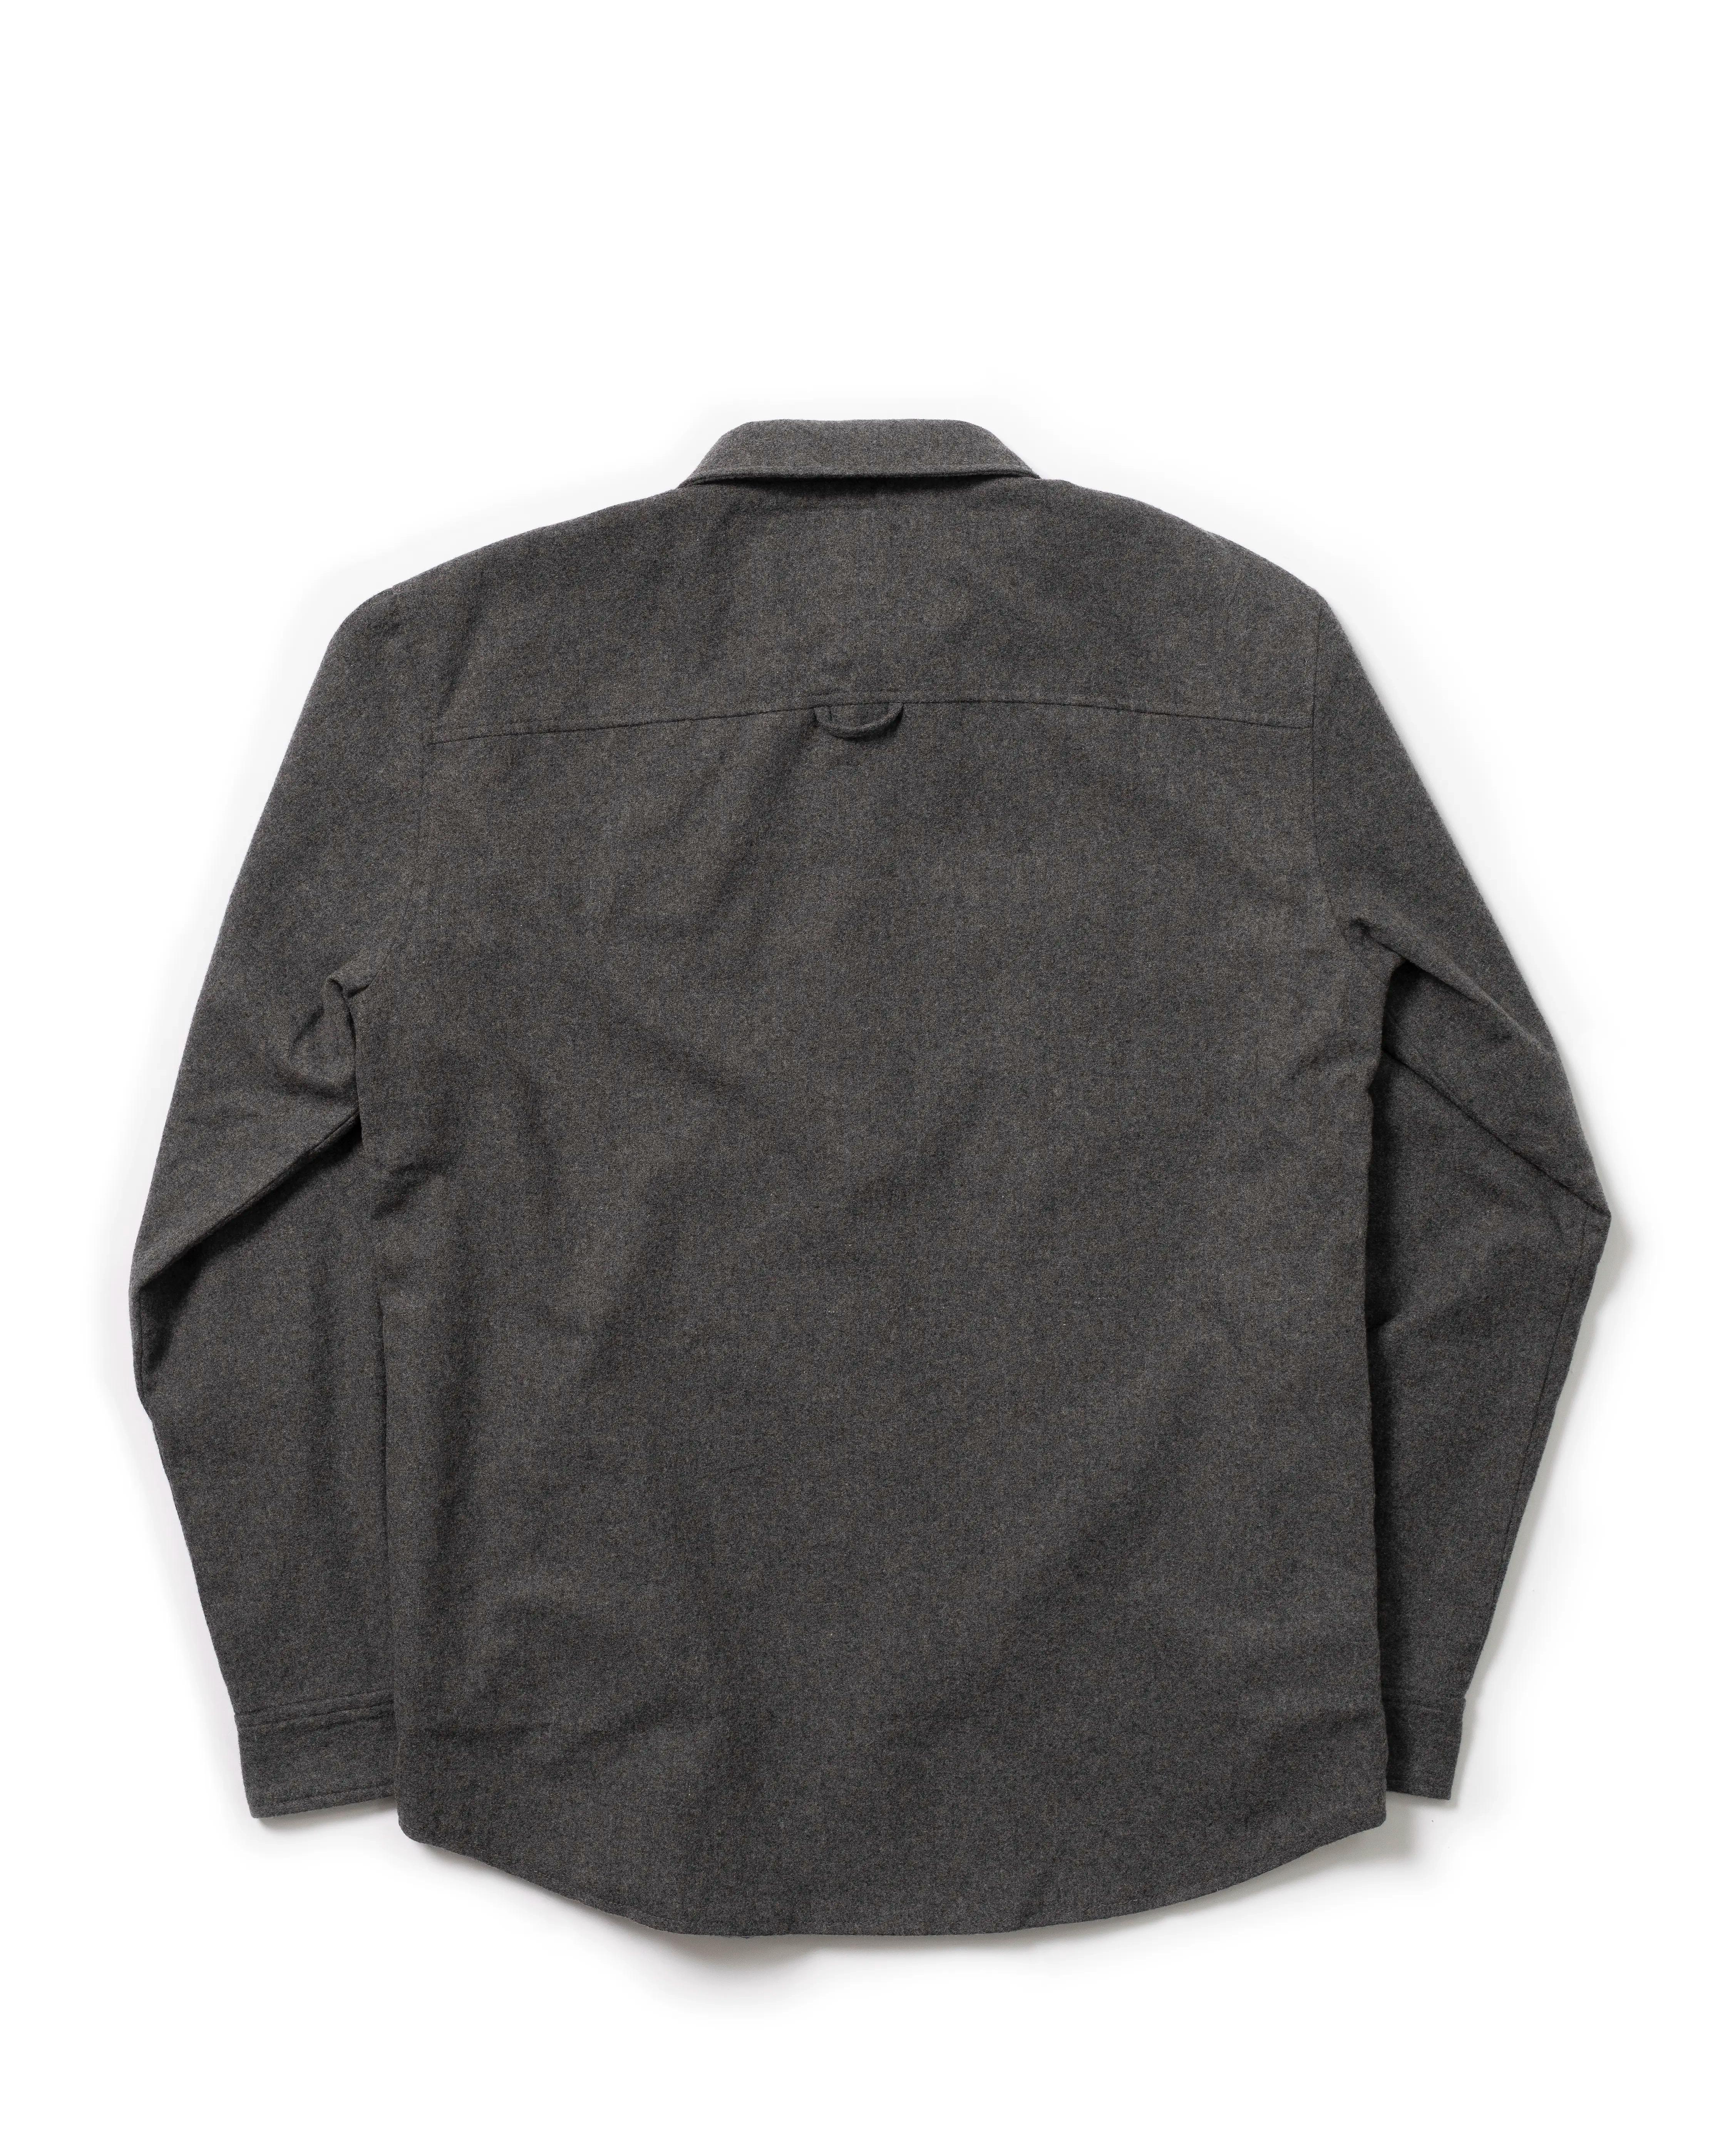 Photo of Midpoint L/S Over Shirt, Grey Melange